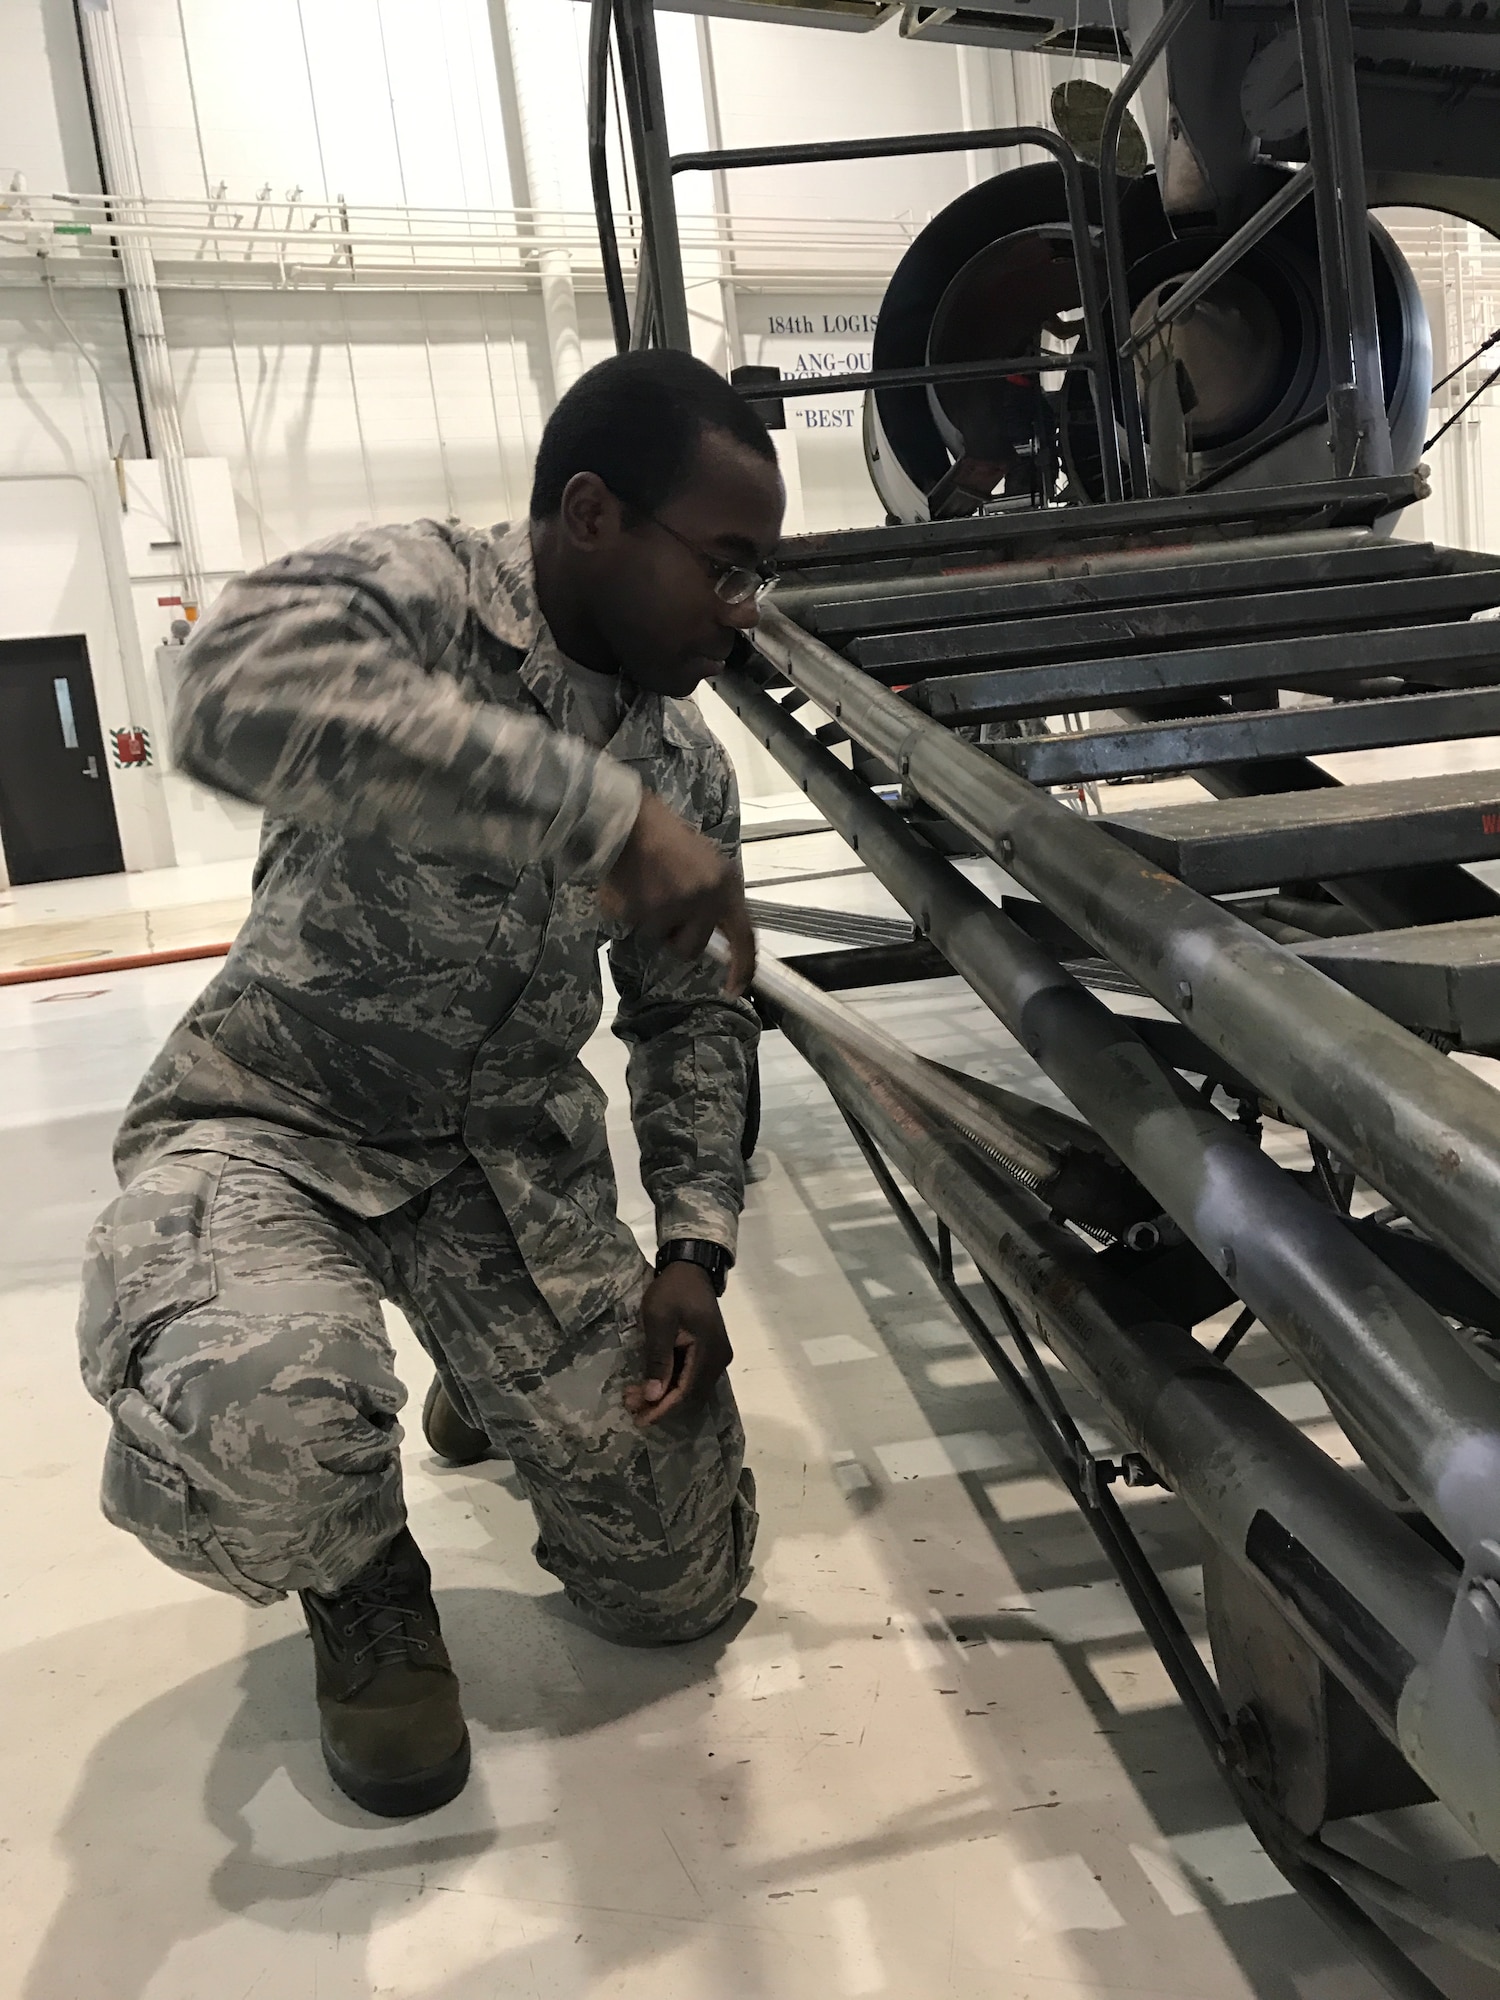 Staff Sgt. Thomas Carter, 931st Maintenance Squadron crew chief, tightens a bolt  as part of an inspection, Jan. 11, 2016, McConnell Air Force Base, Kan.  On Jan. 5, Carter noticed a fire in his apartment  building and alerted eight tenants that lived in his apartment complex.  (U.S. Air Force photo by Tech. Sgt. Abigail Klein)